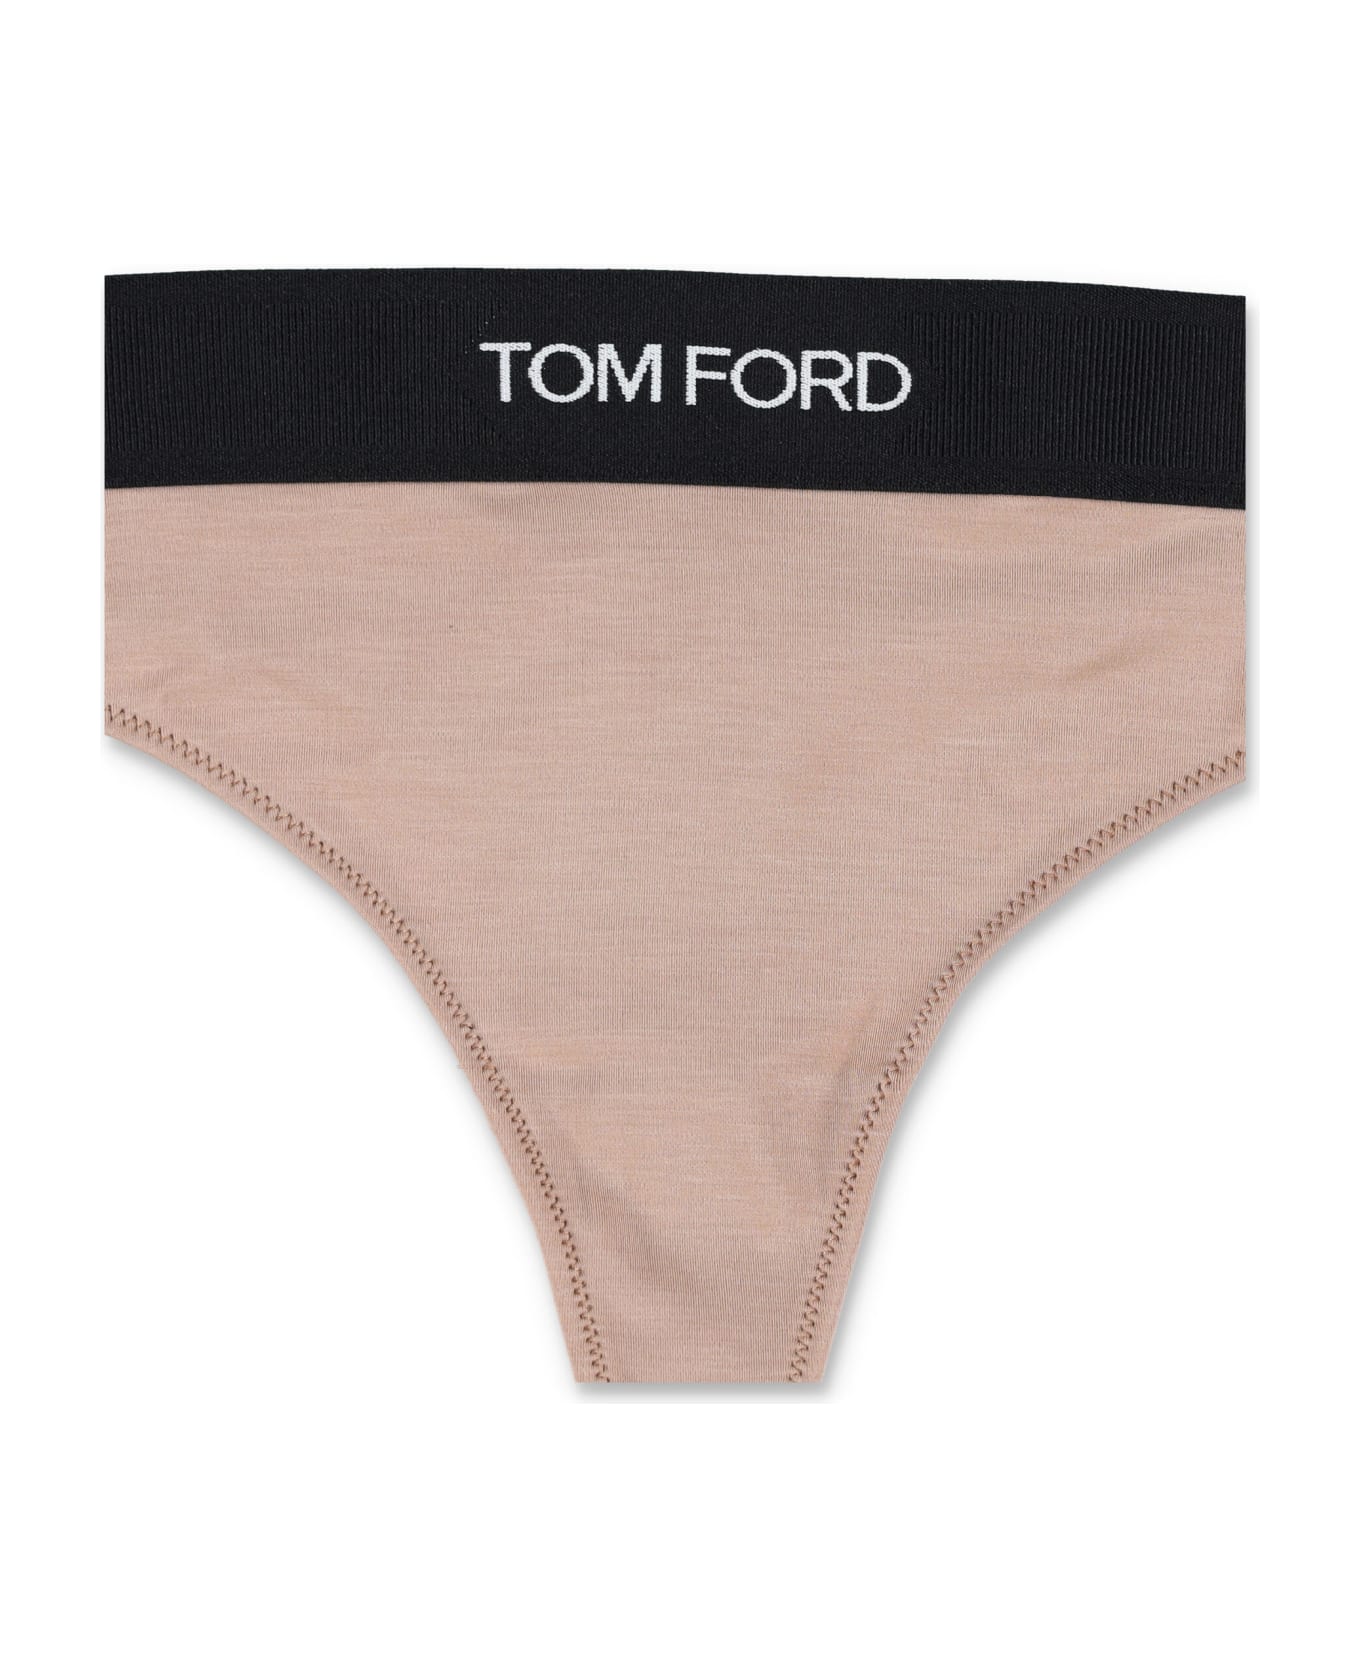 Tom Ford Brief With Logo - DUSTY ROSE ショーツ